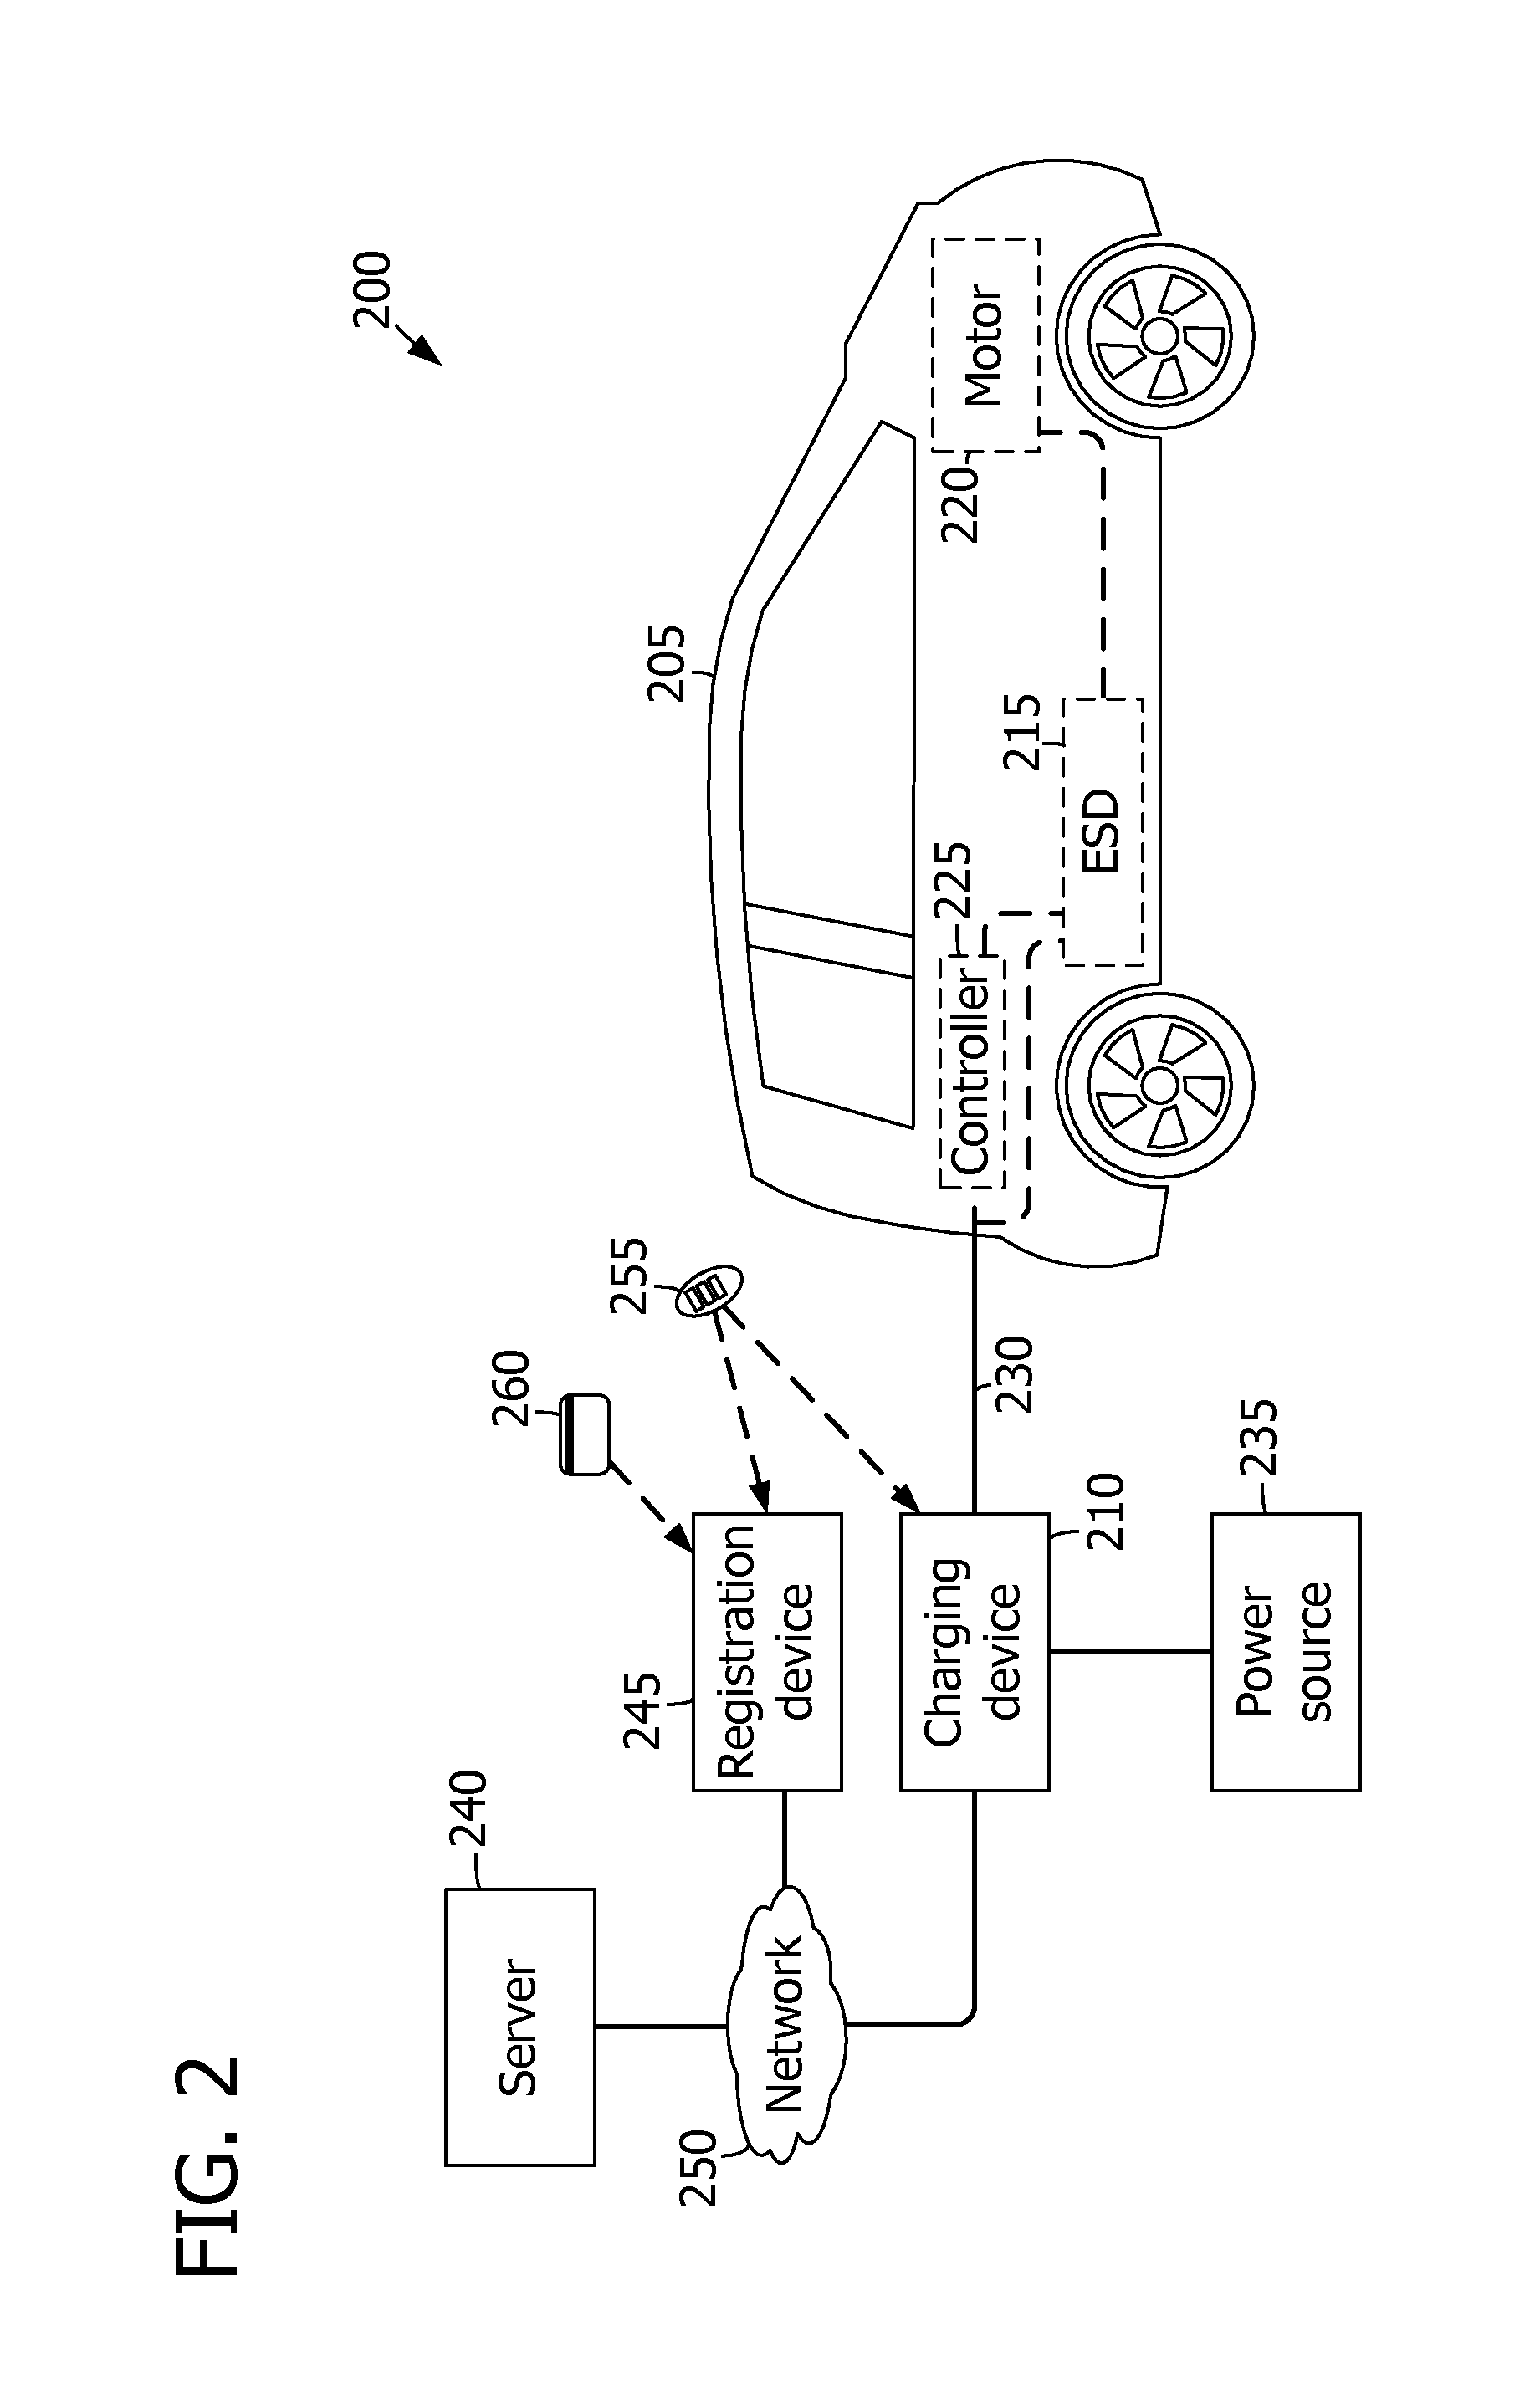 System and method for use in charging an electrically powered vehicle